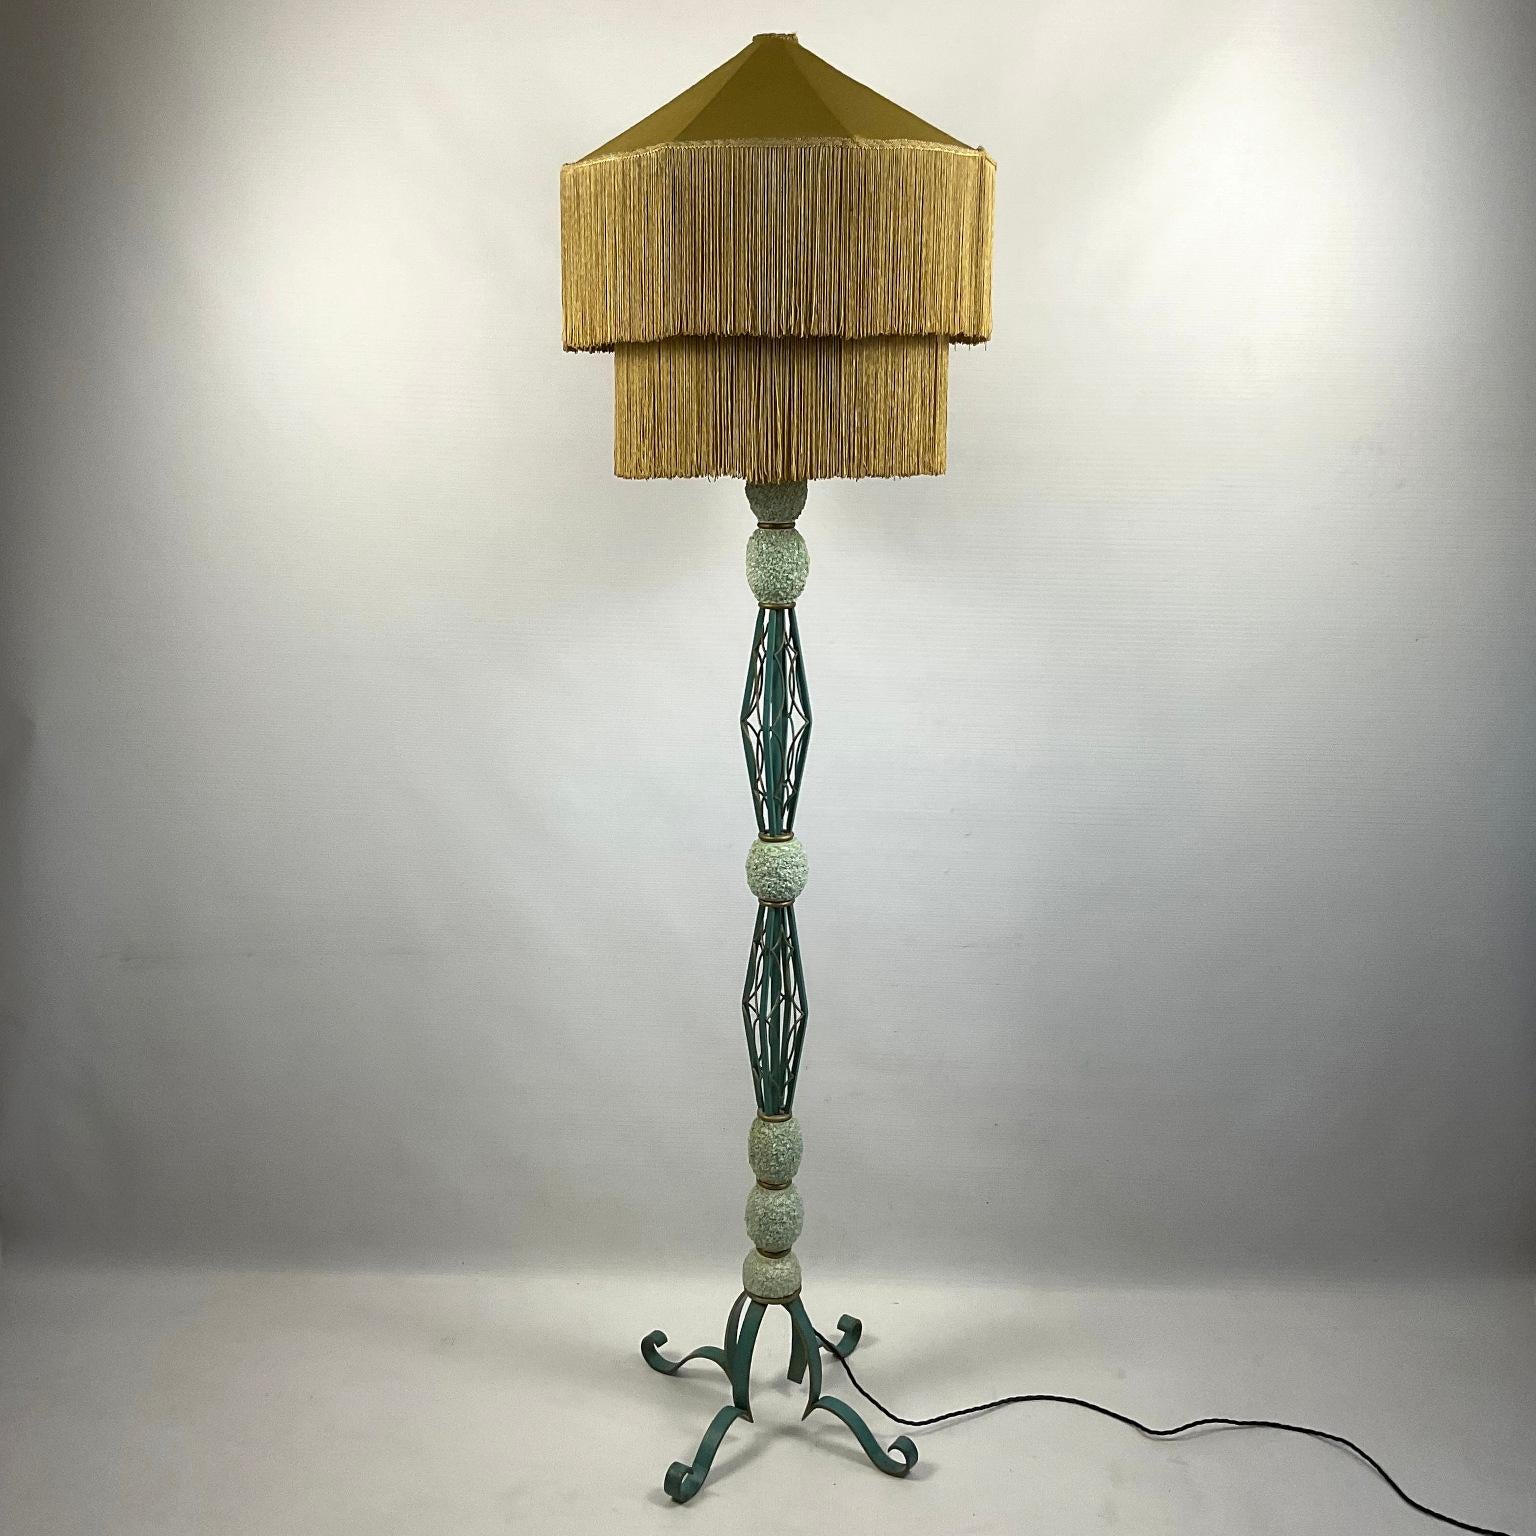 1940s French Wrought Iron Floor Lamp with Turquoise and Gold Enamel Finish  4